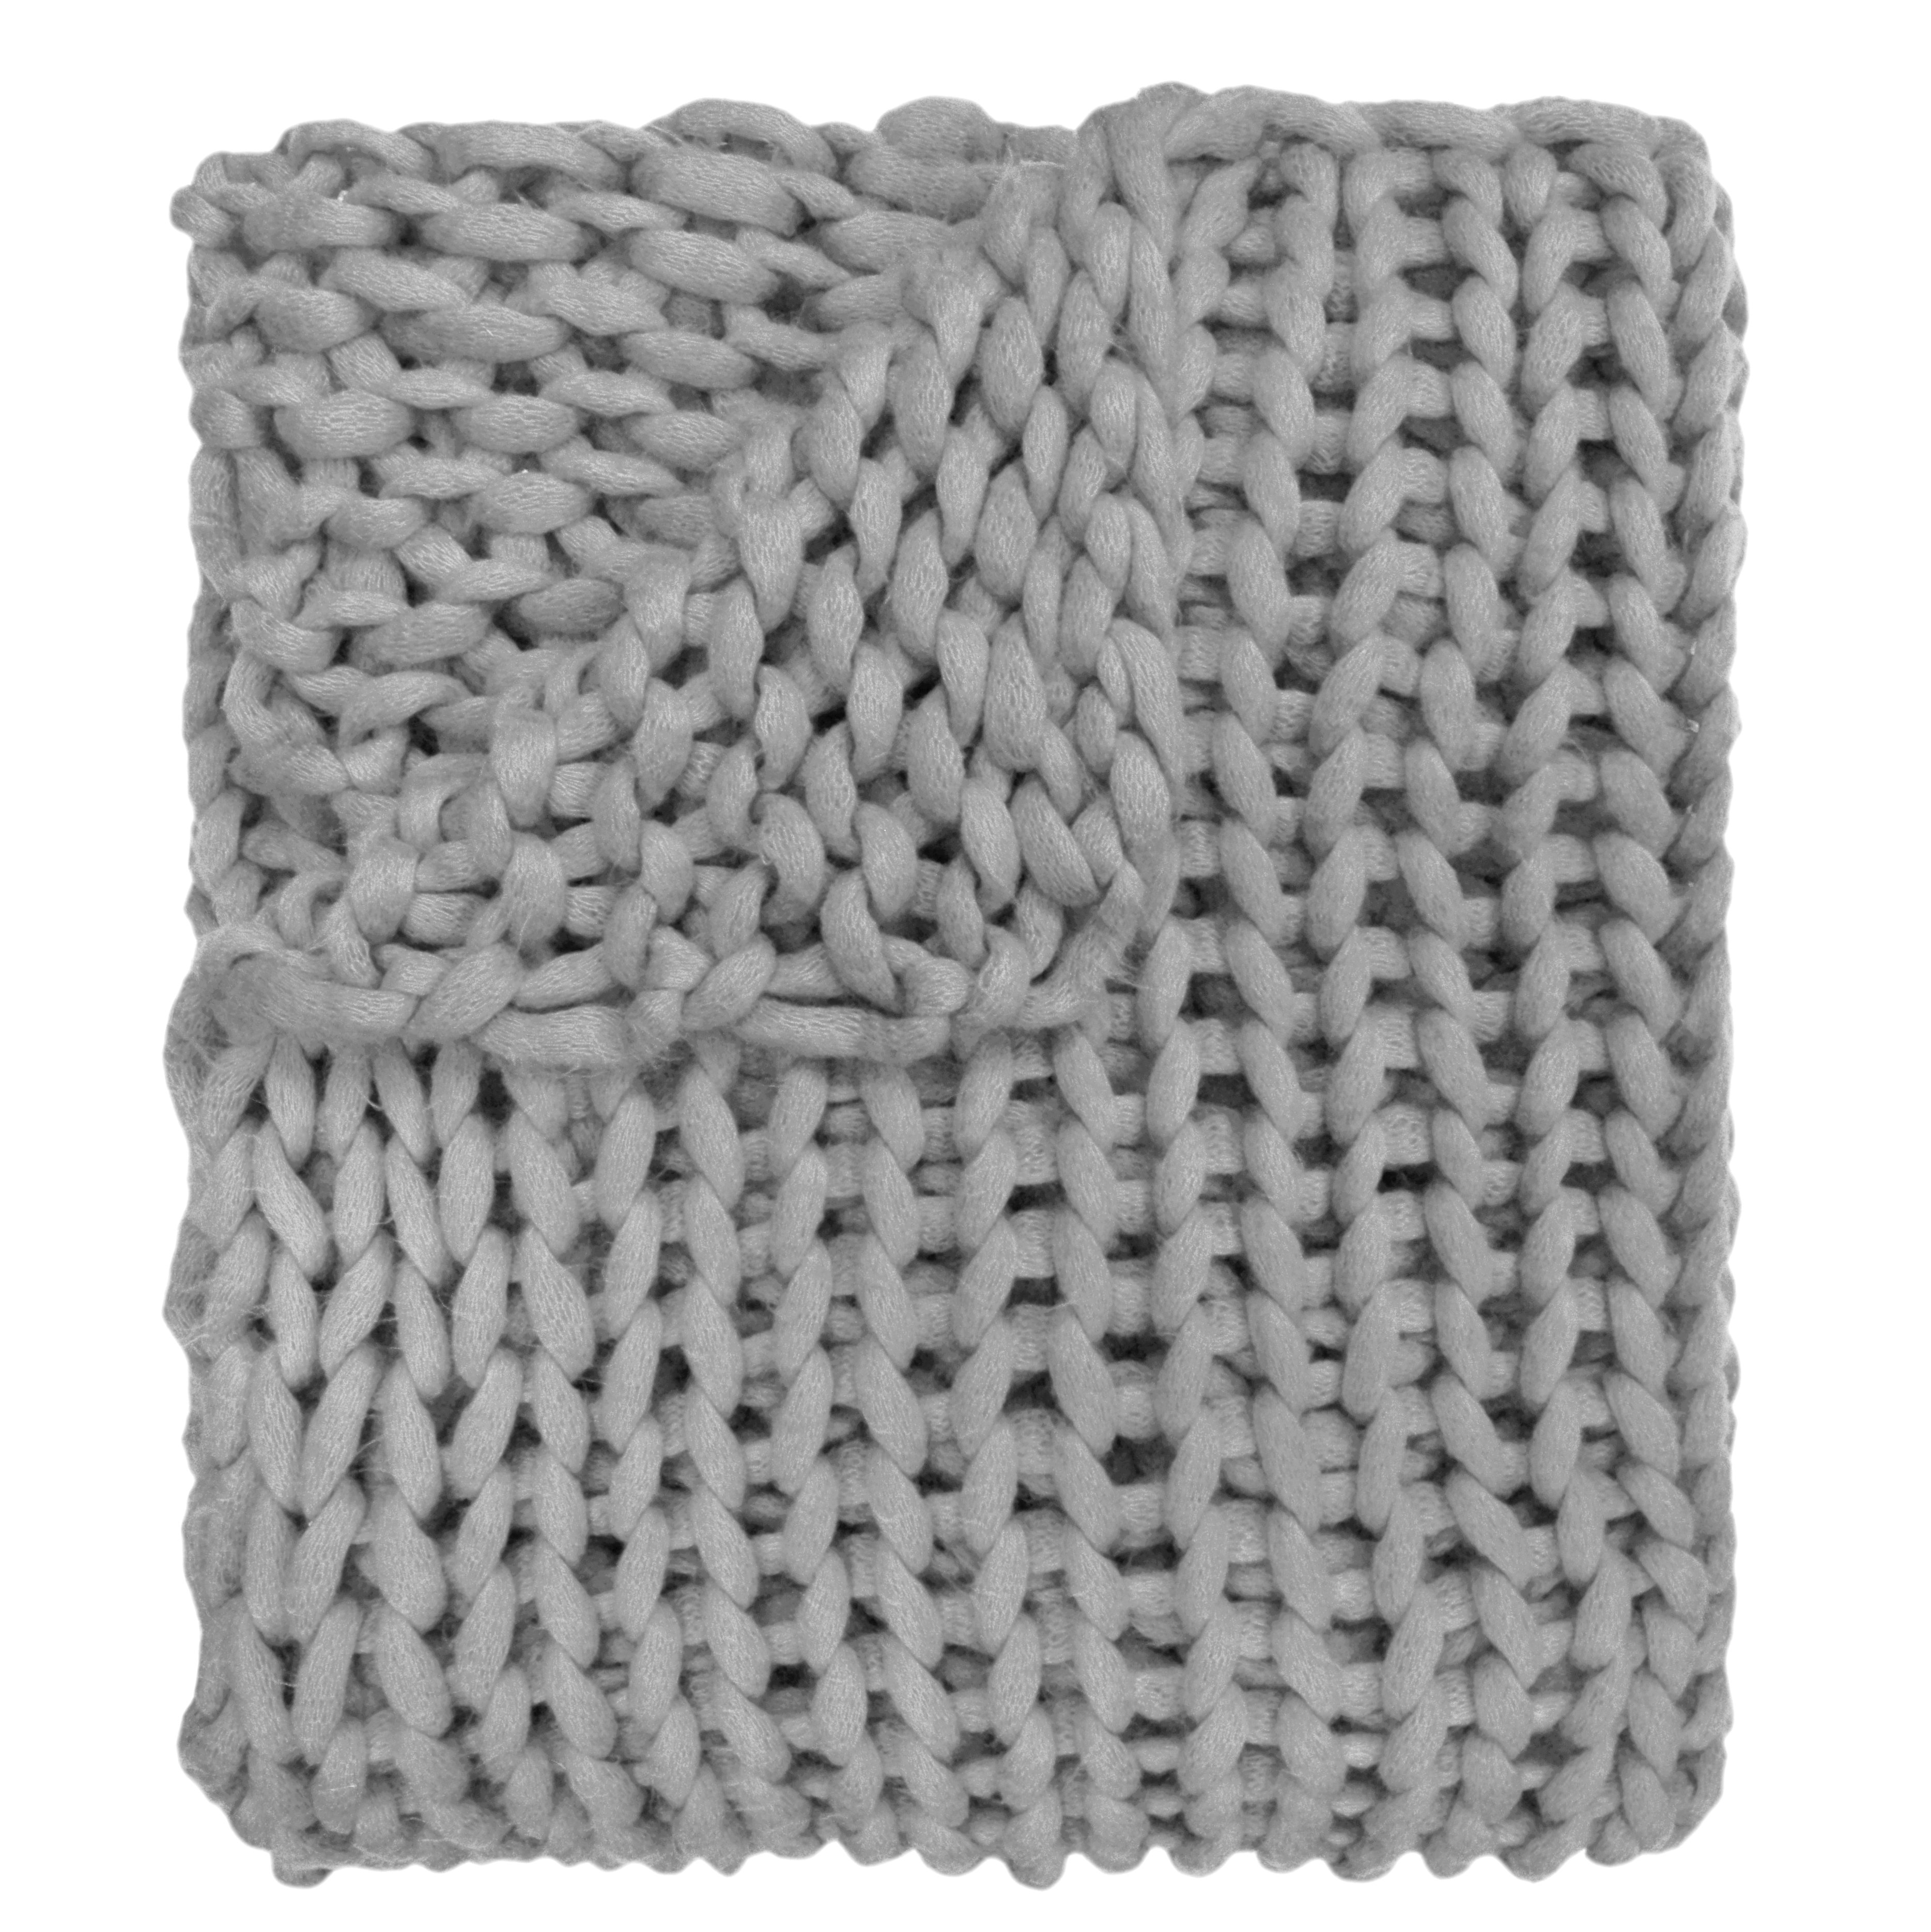 Chunky Knit Blanket Pattern Hardwick Chunky Knitted Acrylic Throw